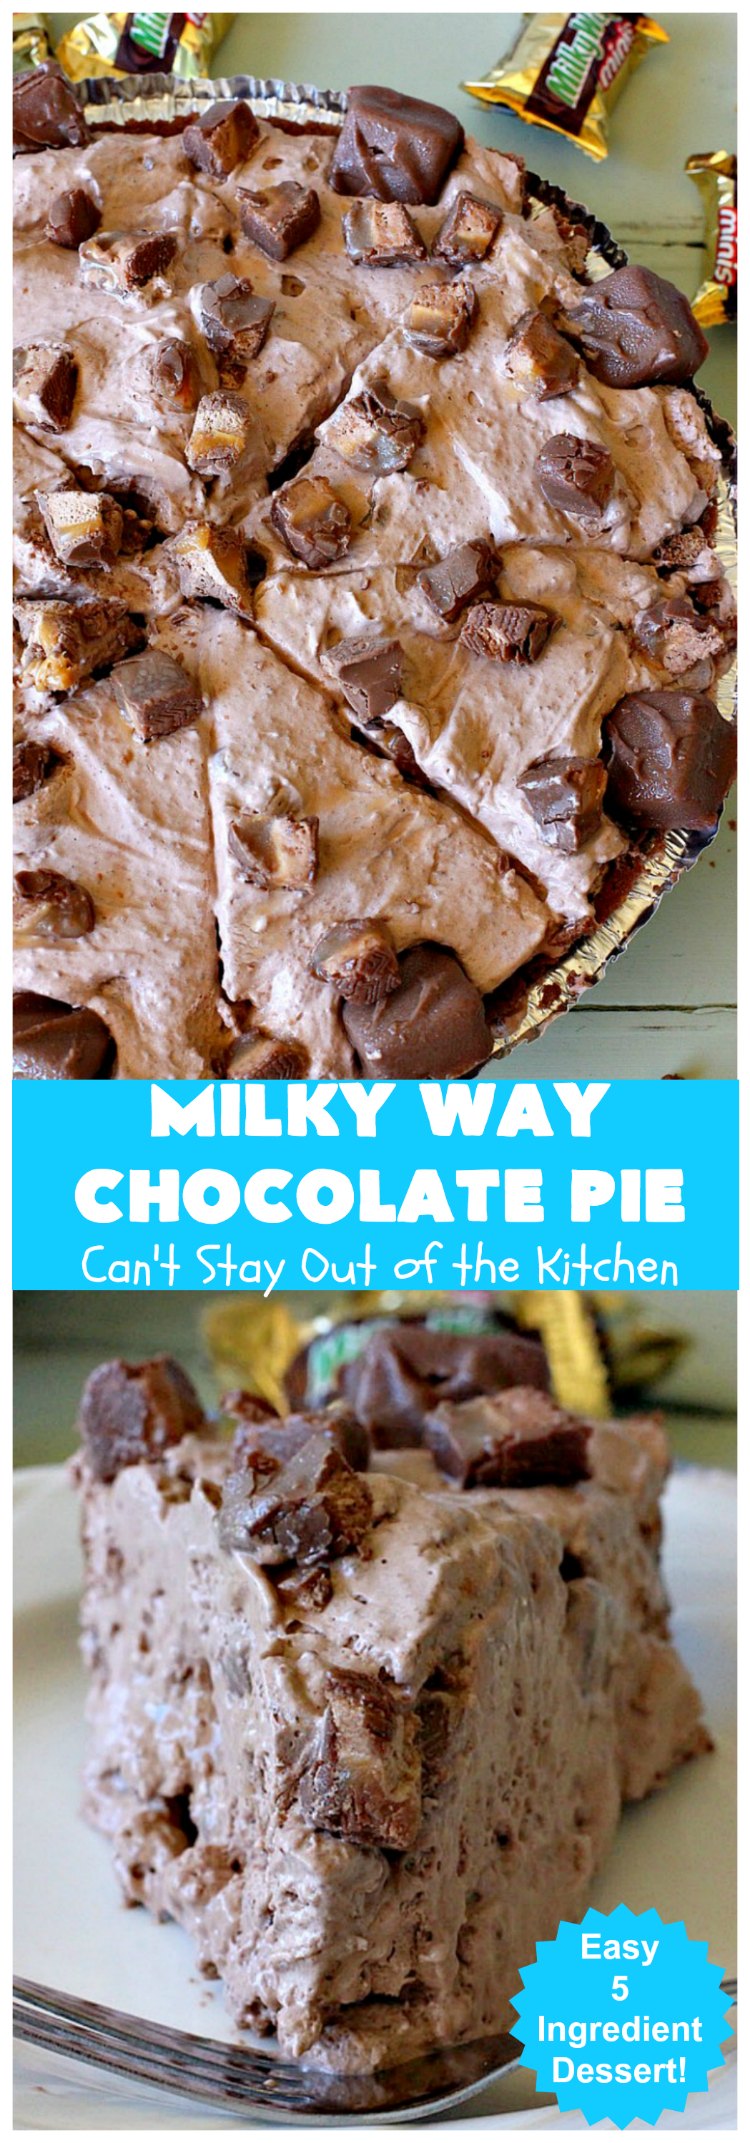 Milky Way Chocolate Pie | Can't Stay Out of the Kitchen | This sensational  #ChocolatePie is rich, decadent, gooey, chocolaty & absolutely amazing. It's filled with #MilkyWayBars and is marvelous for a #holiday or company #dessert. #pie #chocolate #MilkyWayCandyBars #ChocolateDessert #MilkyWayDessert #MilkyWayChocolatePie